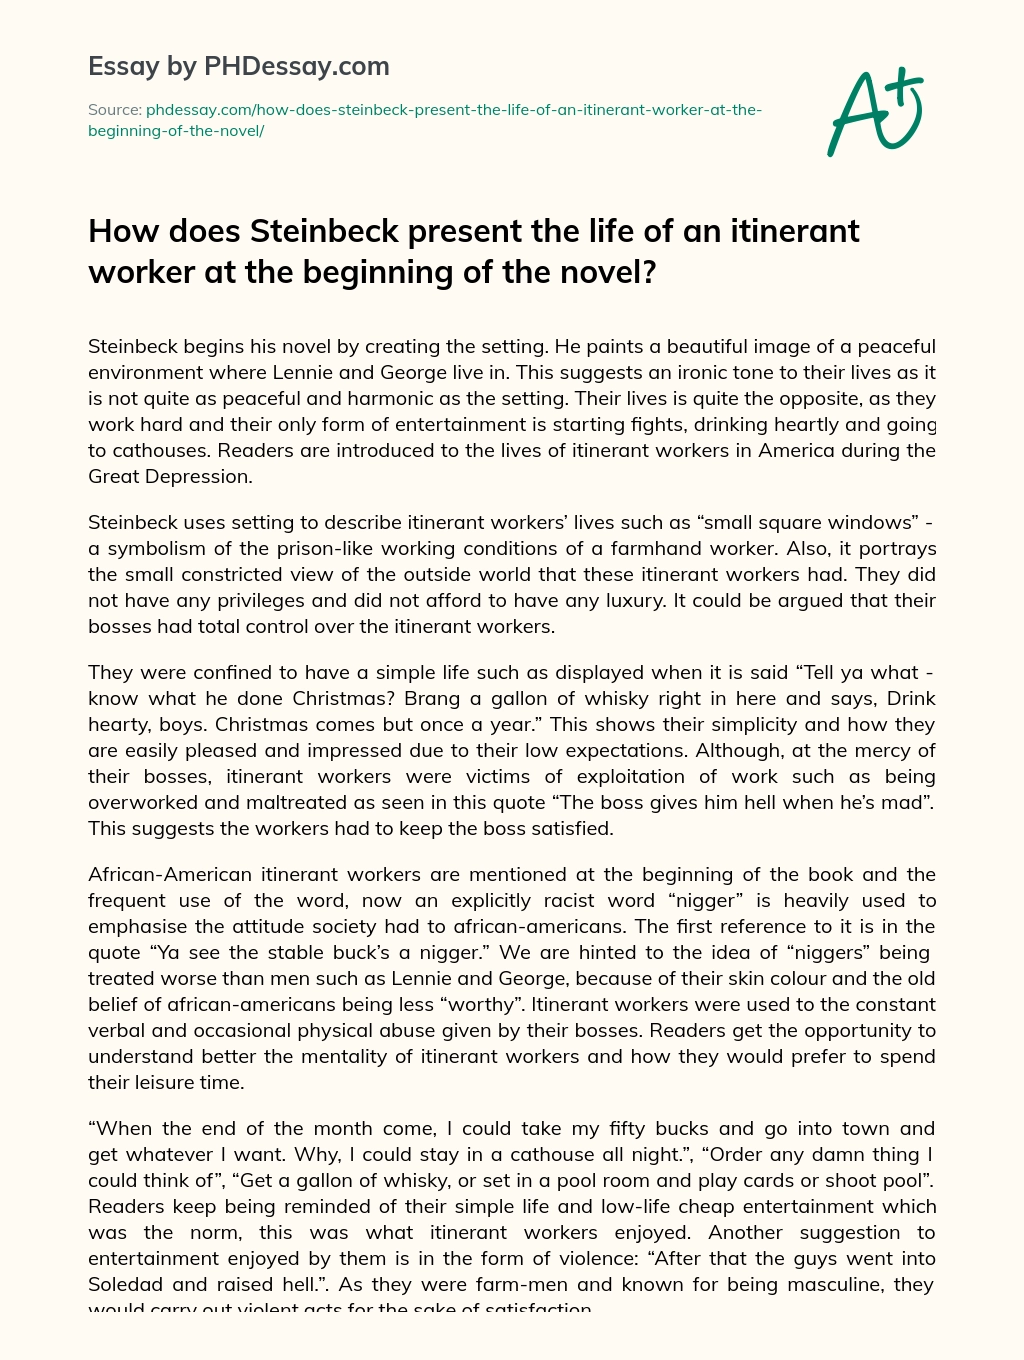 How does Steinbeck present the life of an itinerant worker at the beginning of the novel? essay